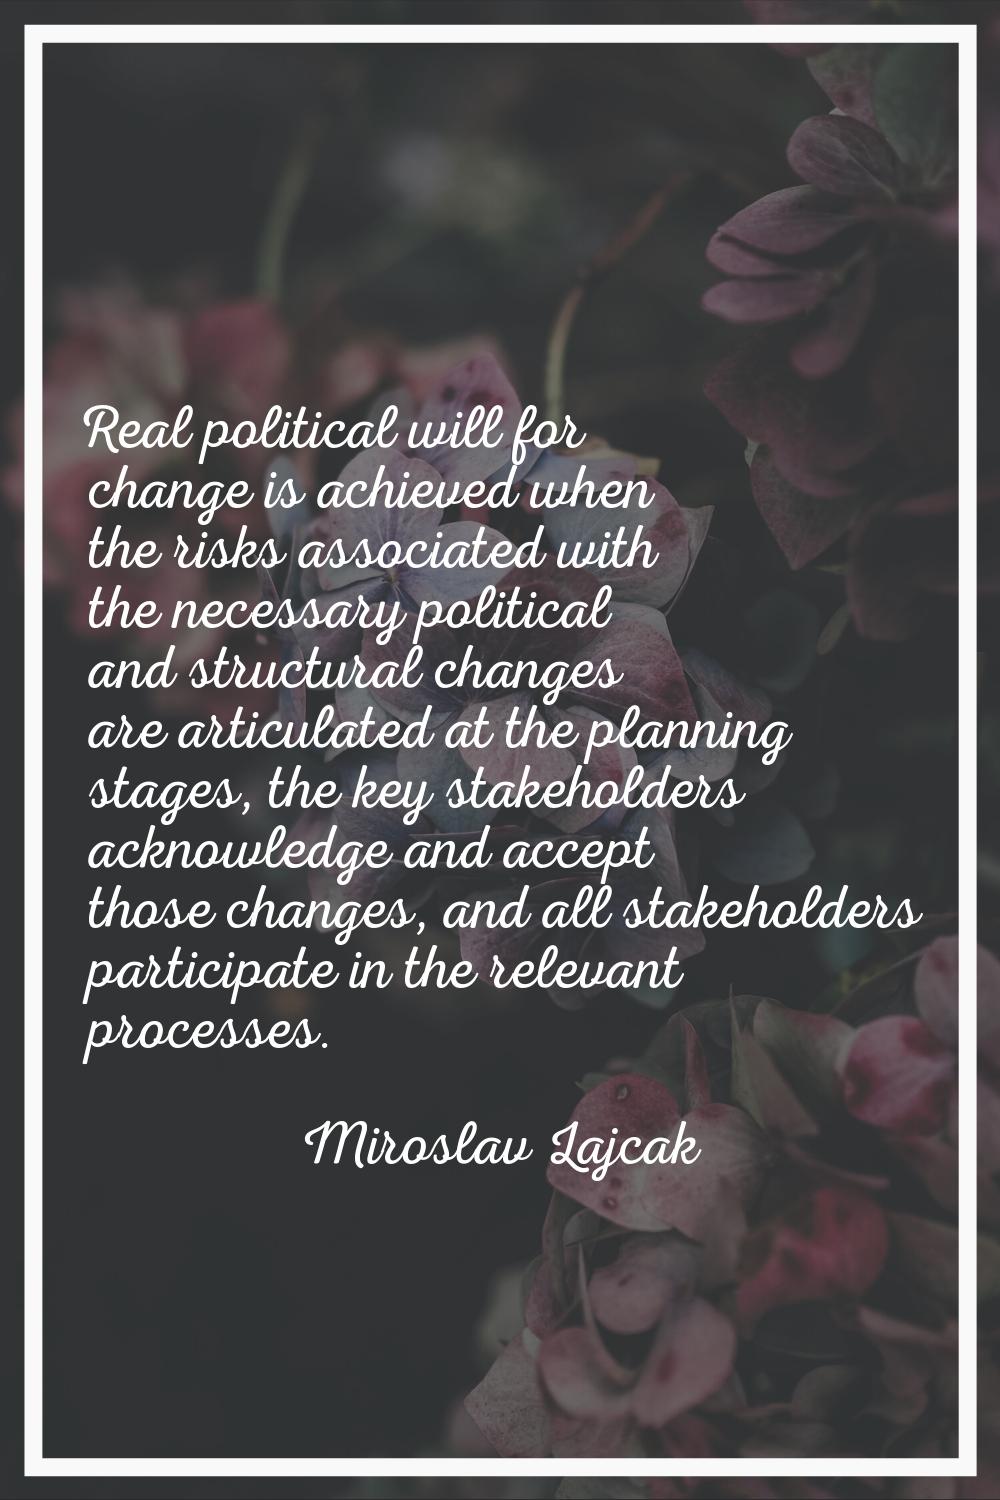 Real political will for change is achieved when the risks associated with the necessary political a